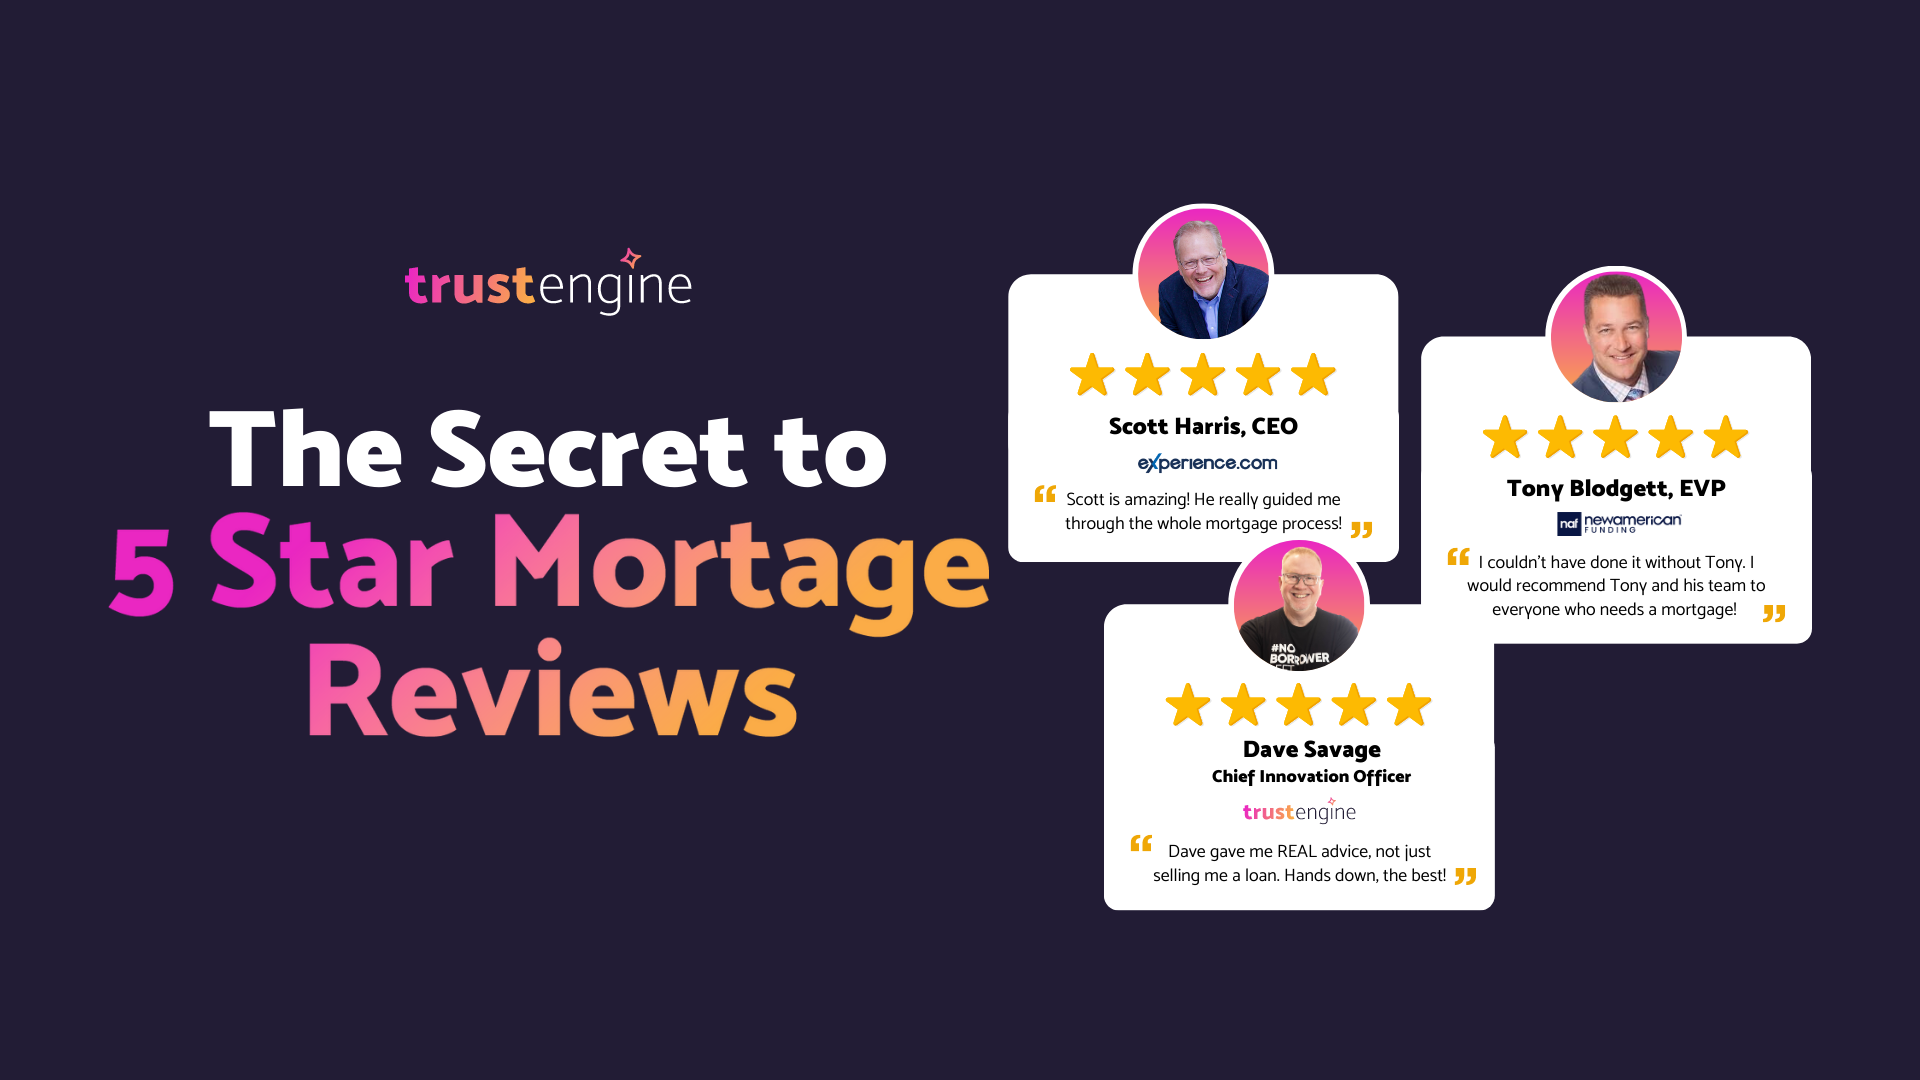 The Secret to 5 Star Mortgage Reviews